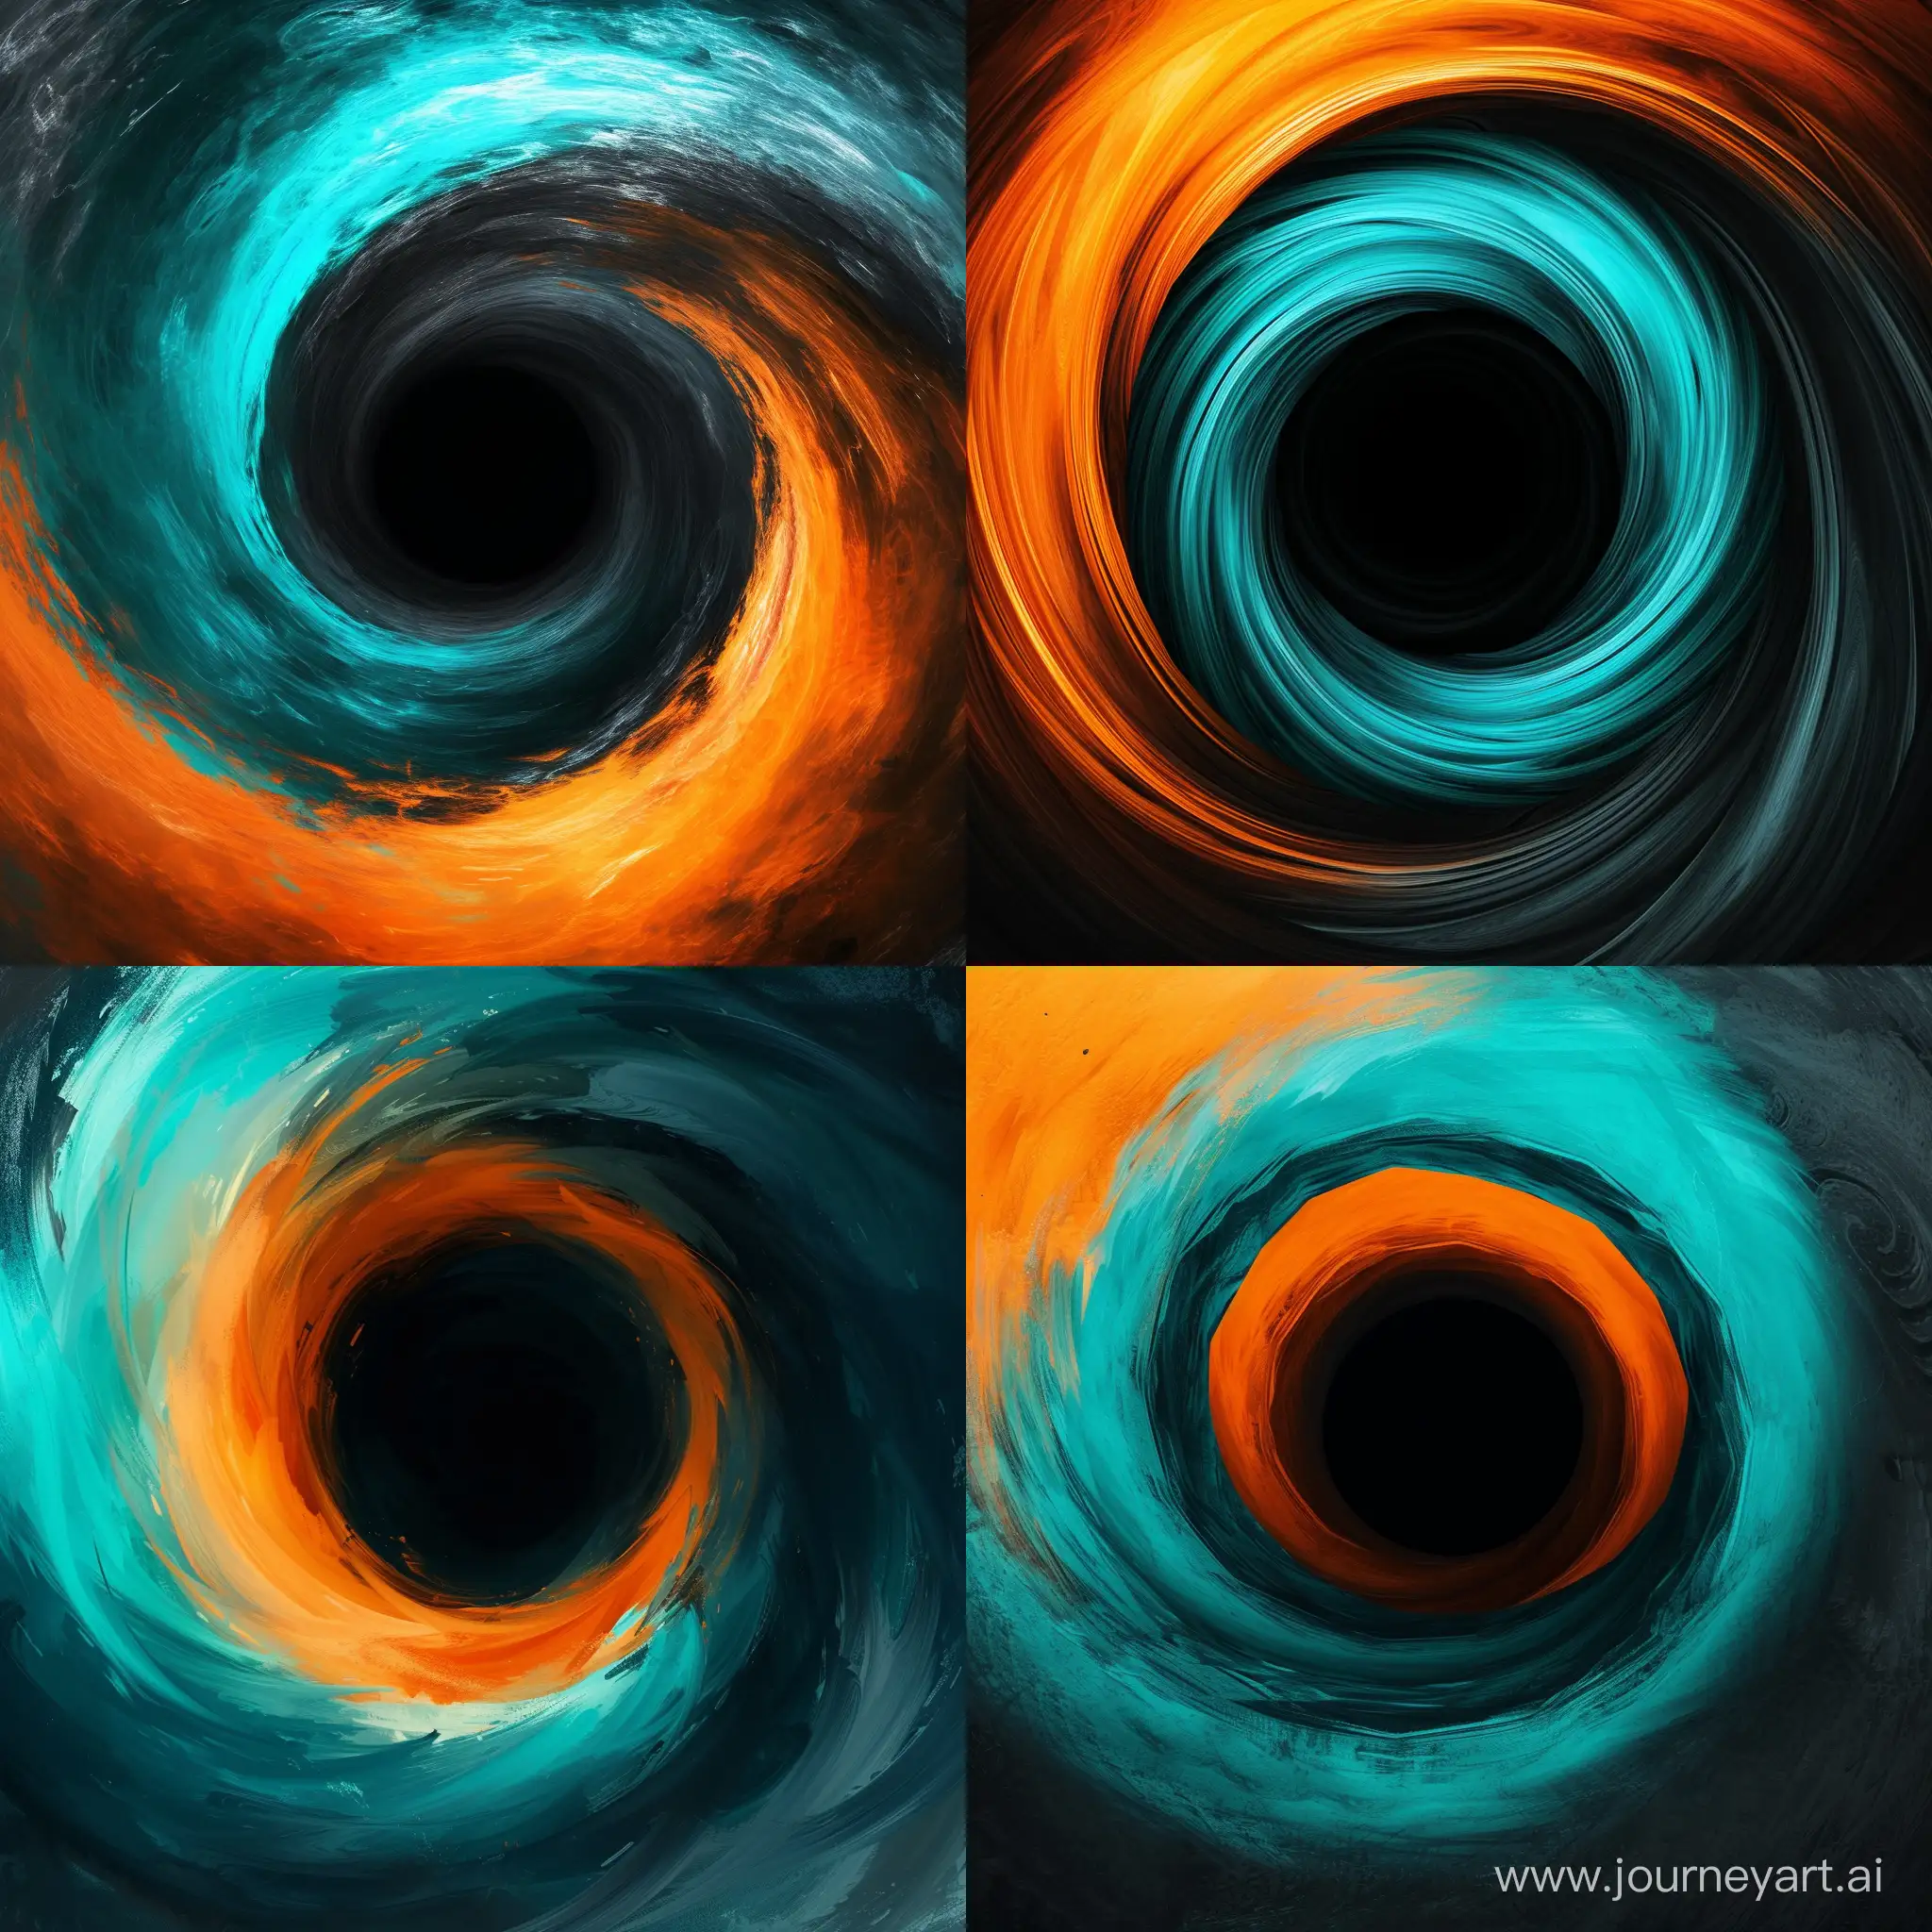 Vibrant-Black-Hole-Absorbing-Orange-Blue-and-Turquoise-Colors